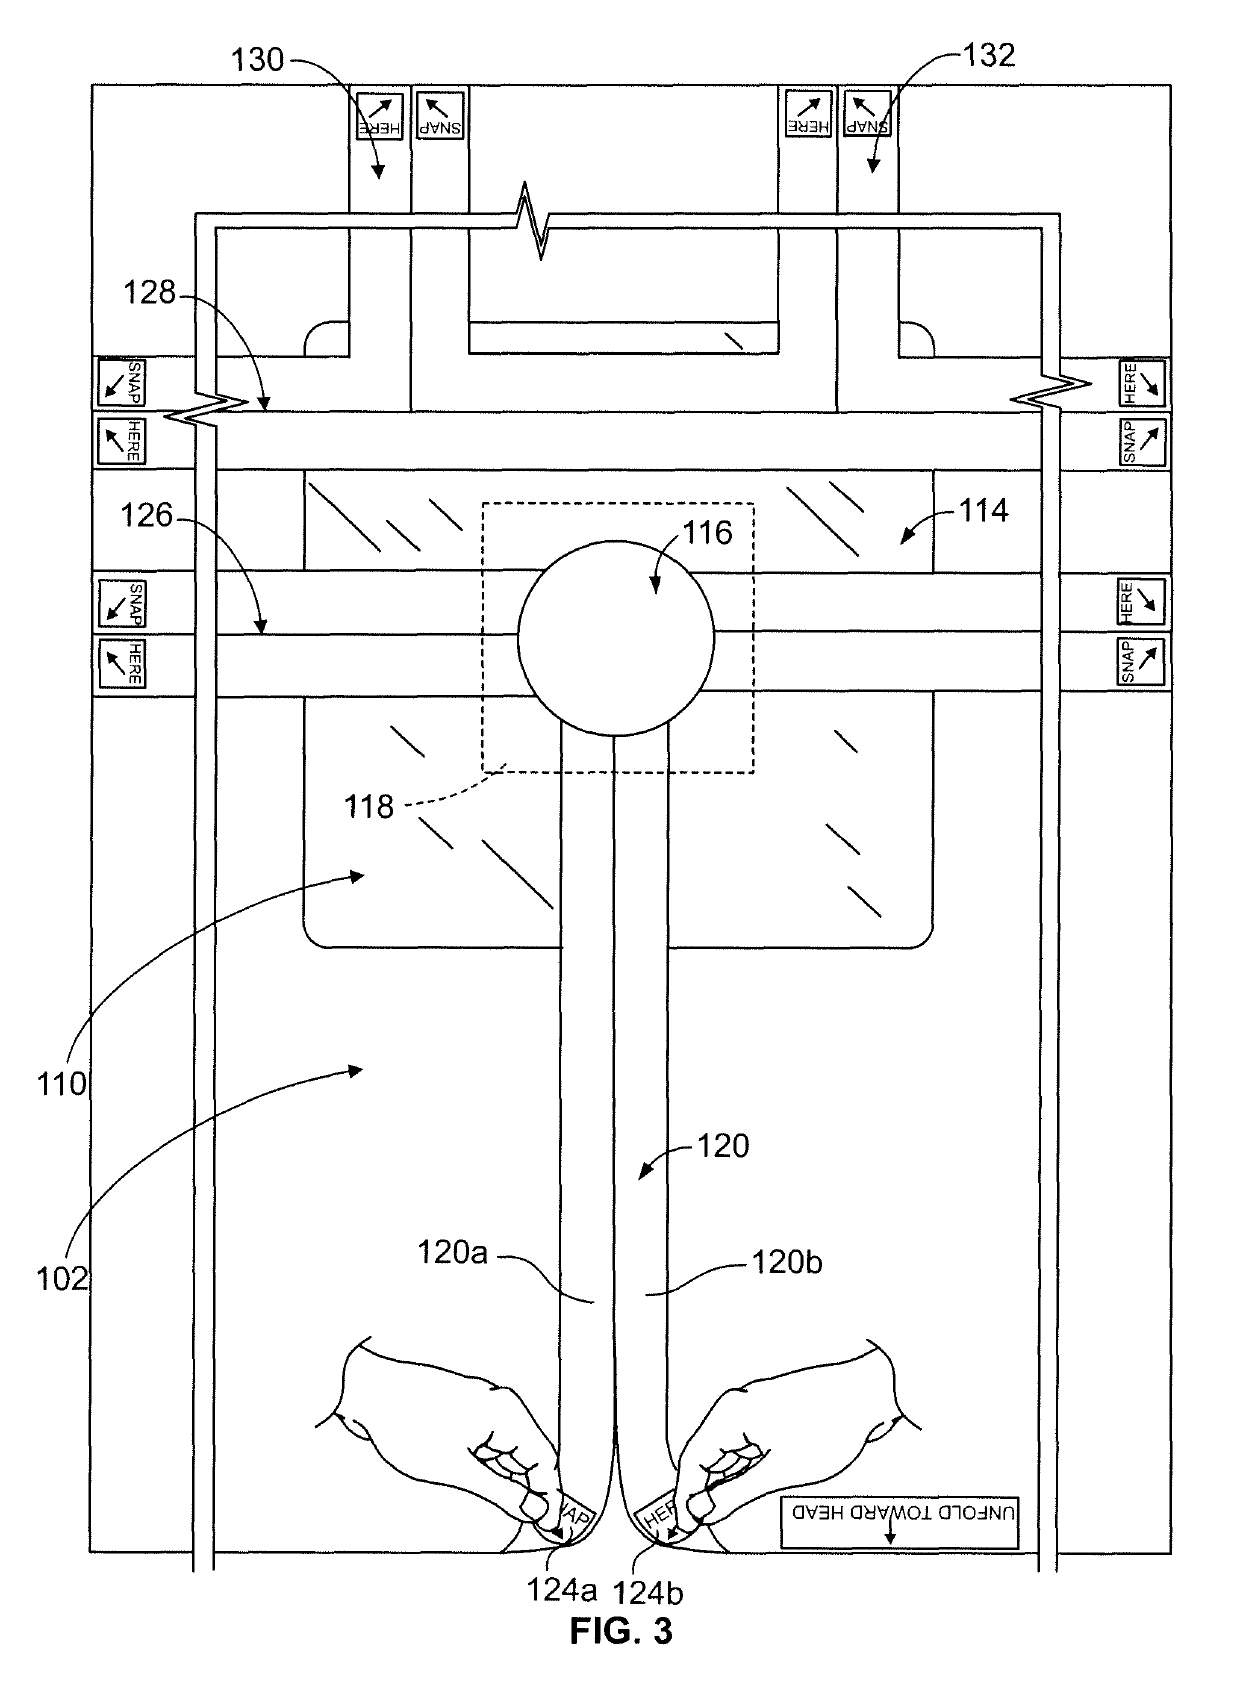 Zip strip draping system and methods of manufacturing same